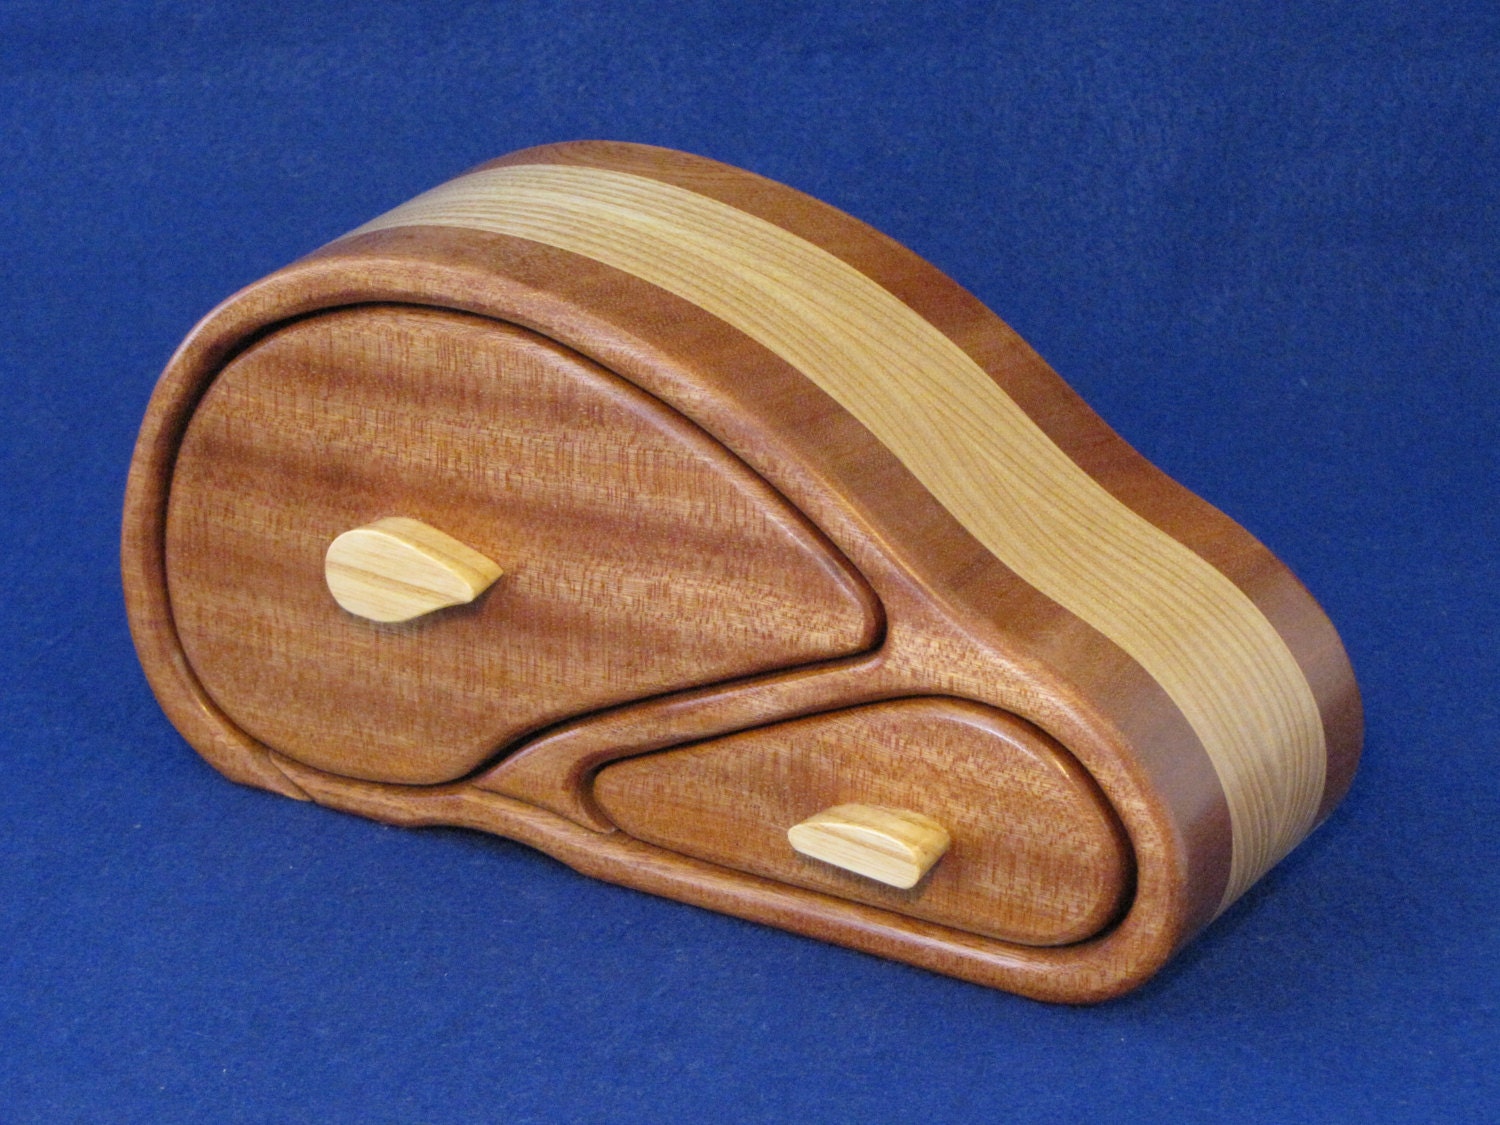 Custom Bandsaw Jewelry Box For Both Large And Small Jewelry